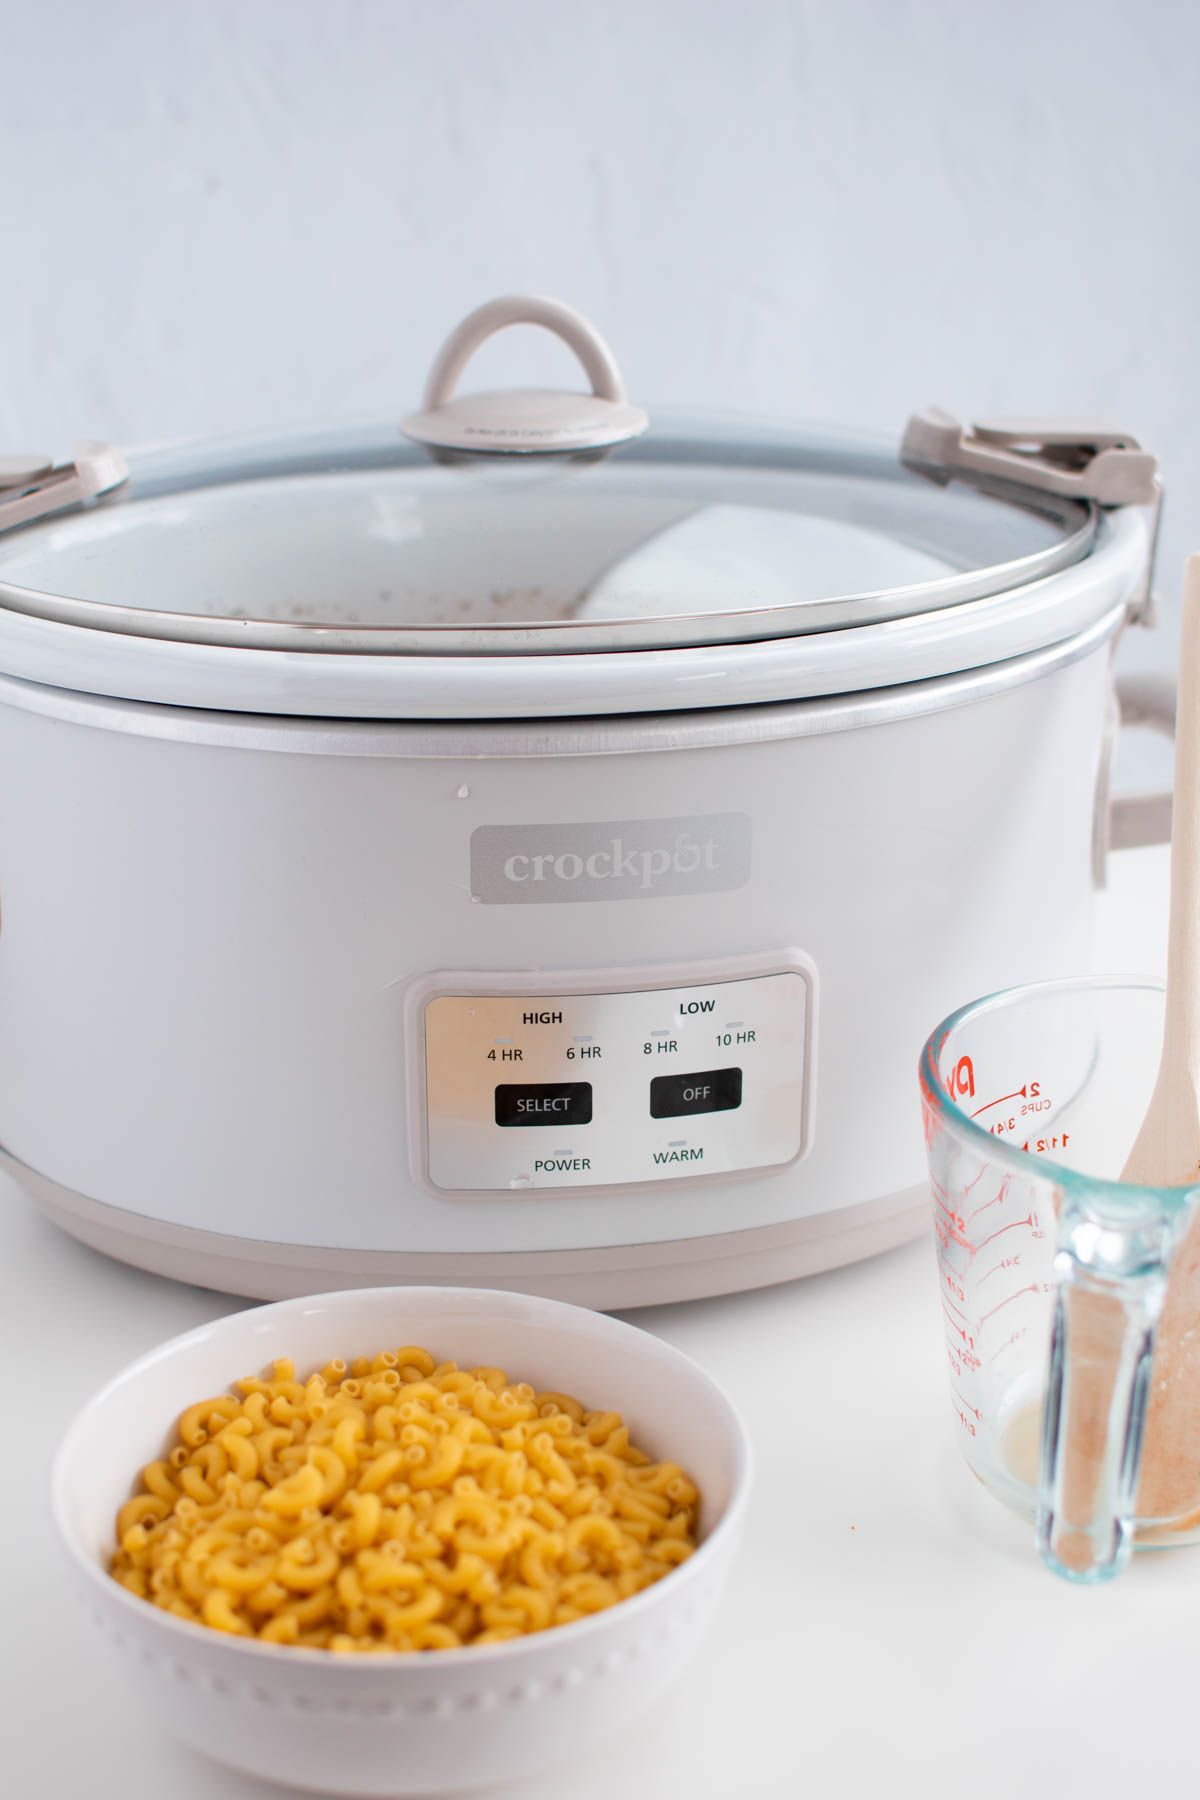 Crock Pot with lid on table with bowl of uncooked macaroni nearby.